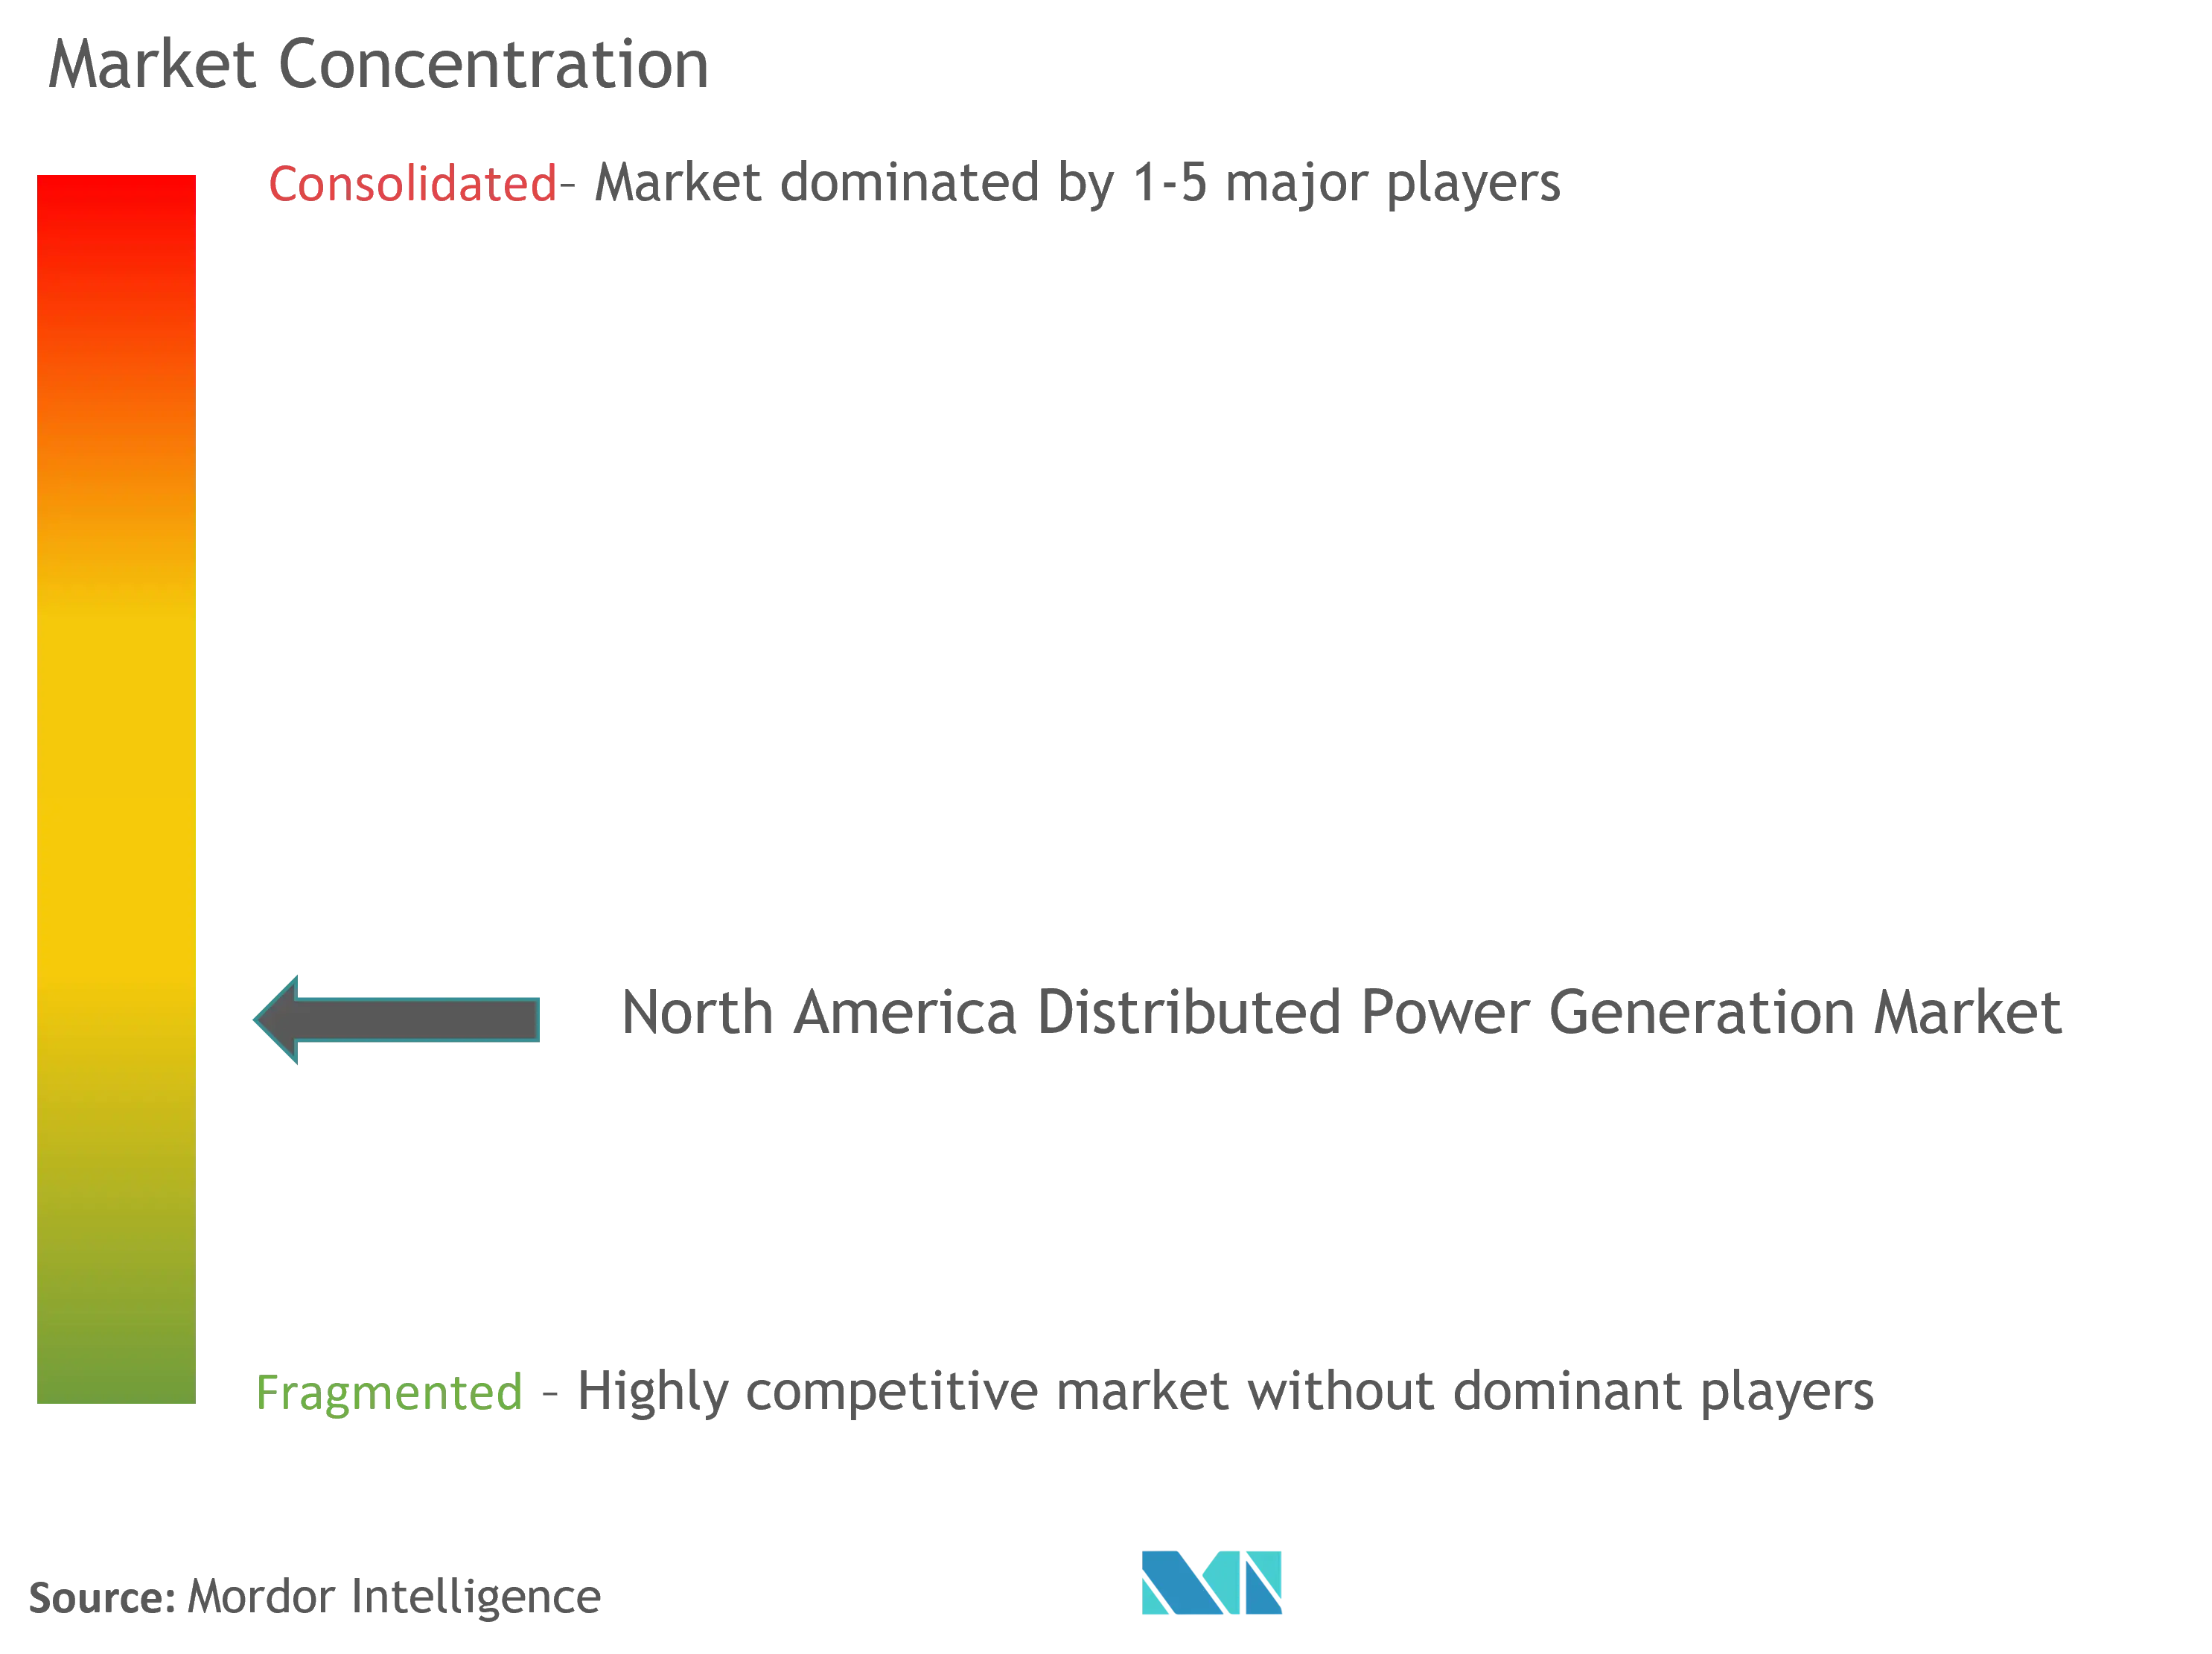 North America Distributed Power Generation Market Concentration